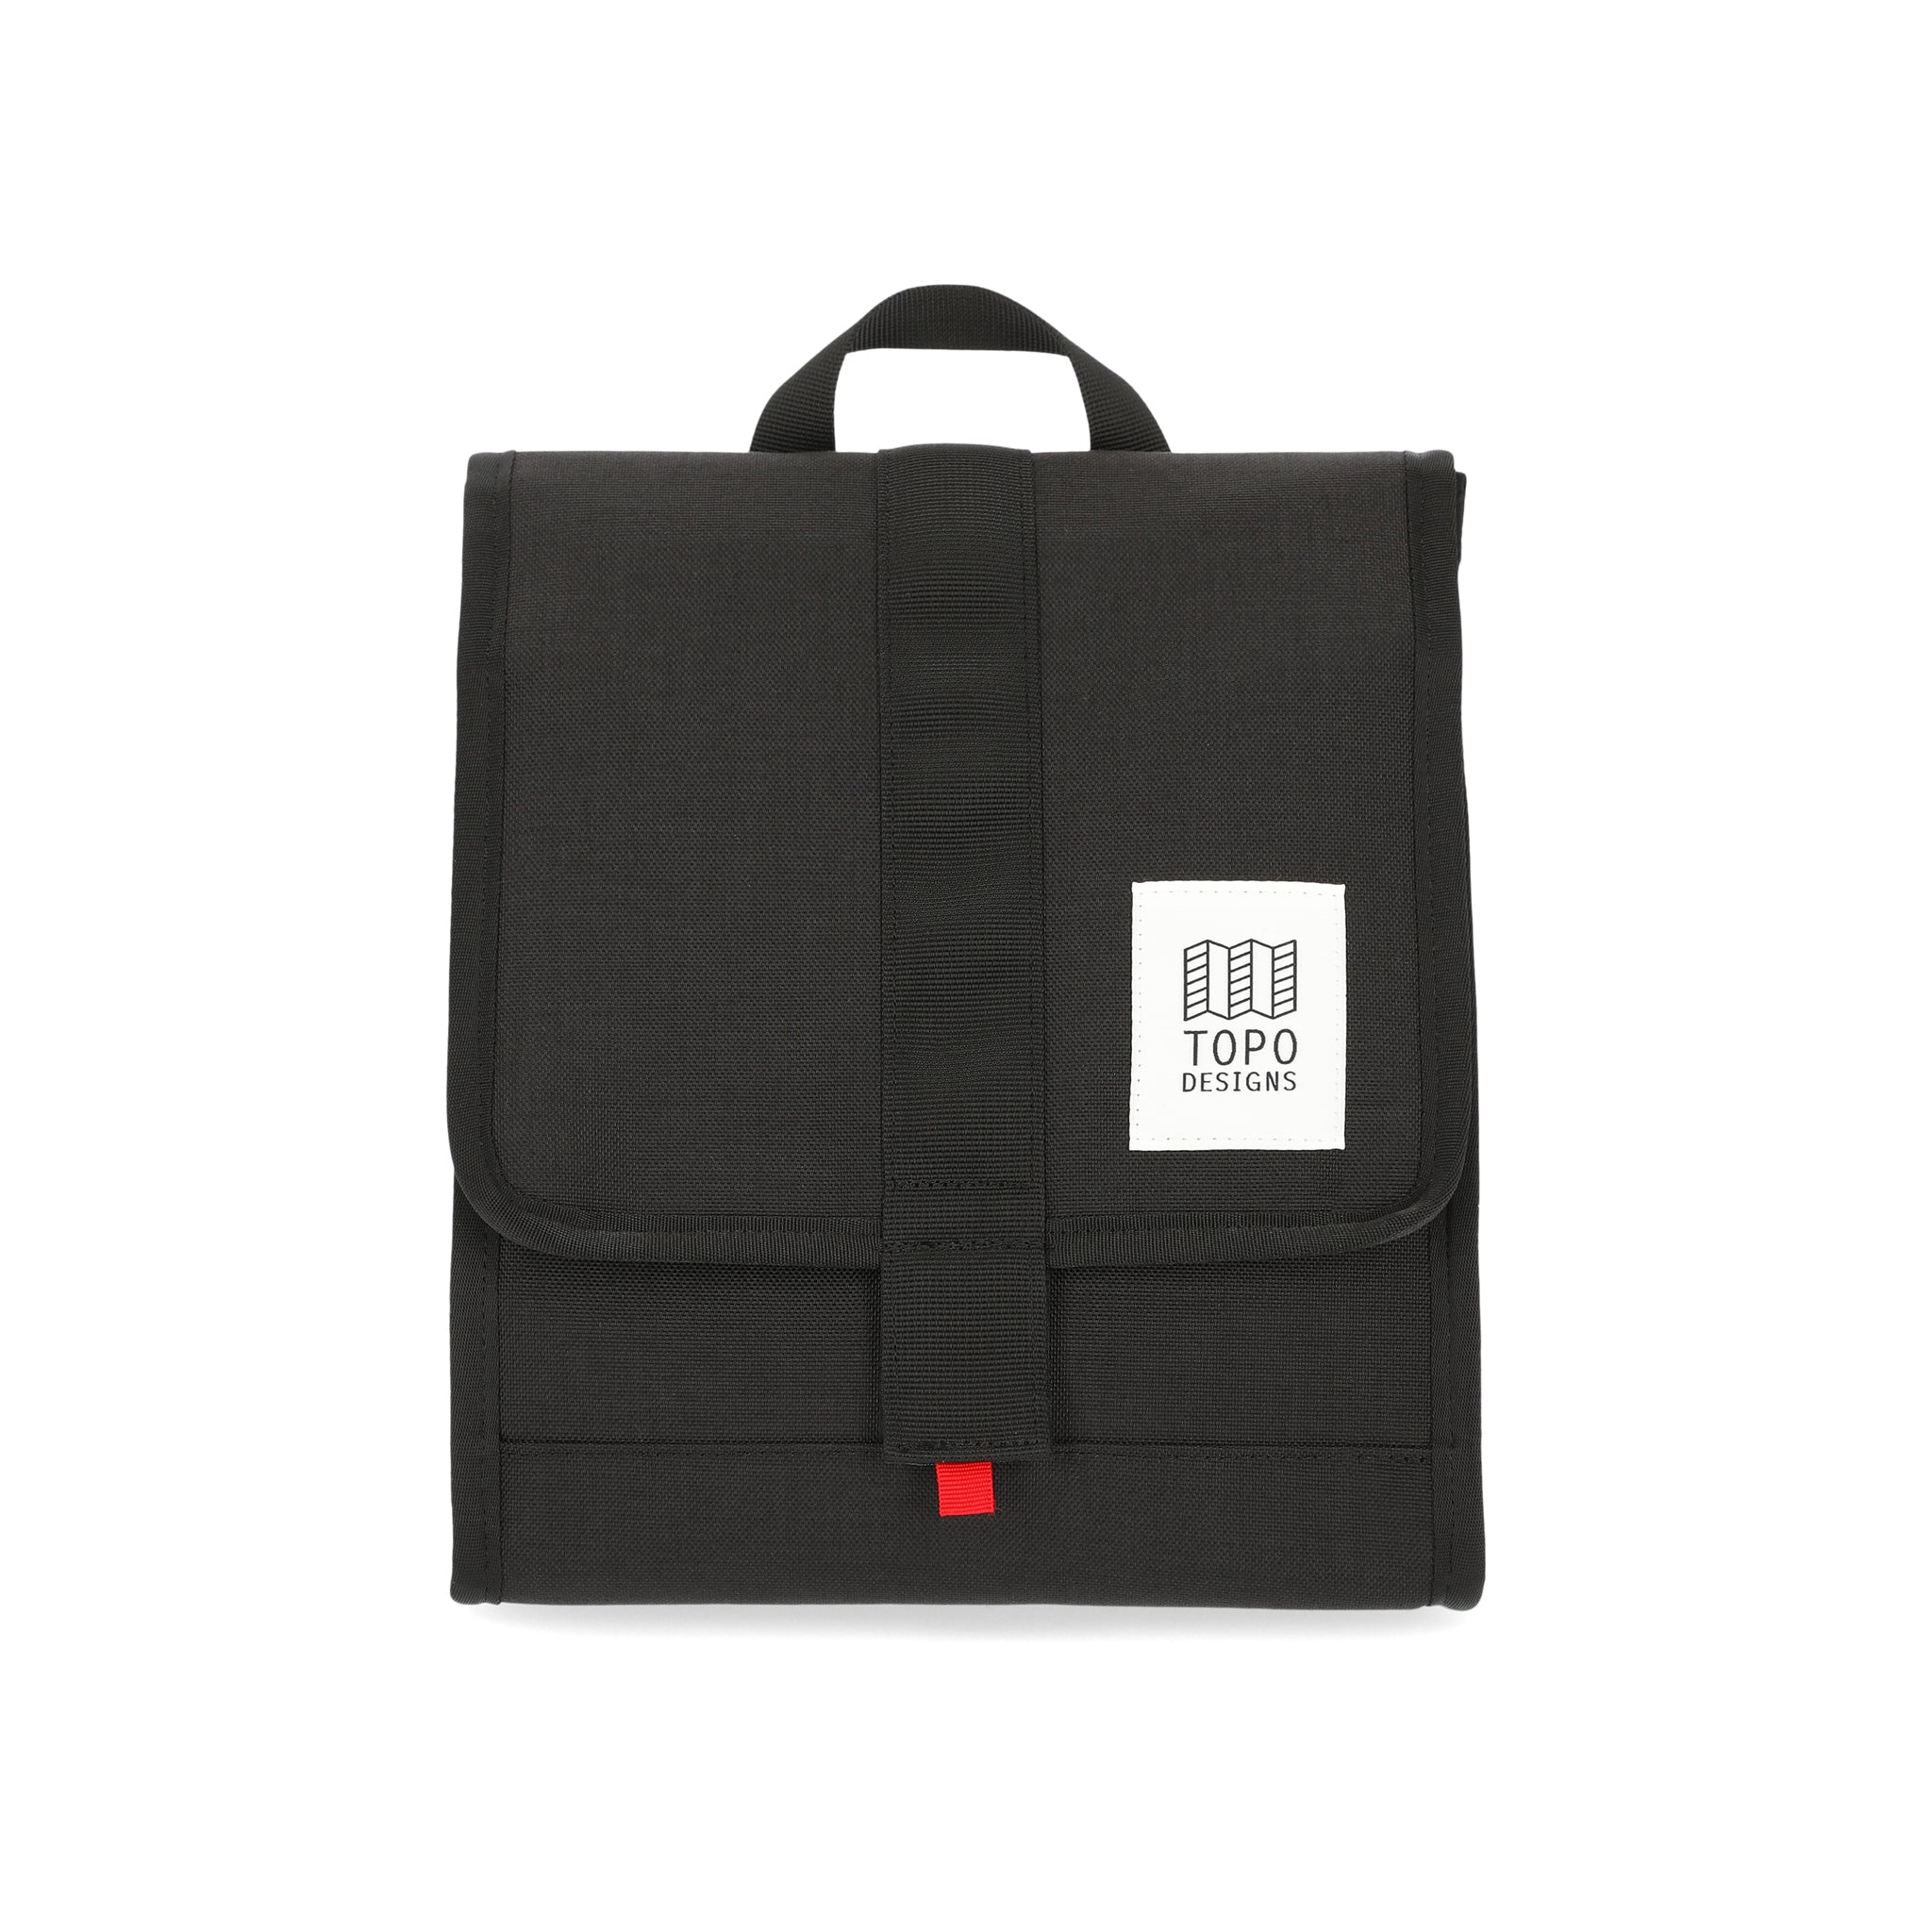 Topo Designs Cooler Bag insulated lunch box in "Black" recycled nylon.